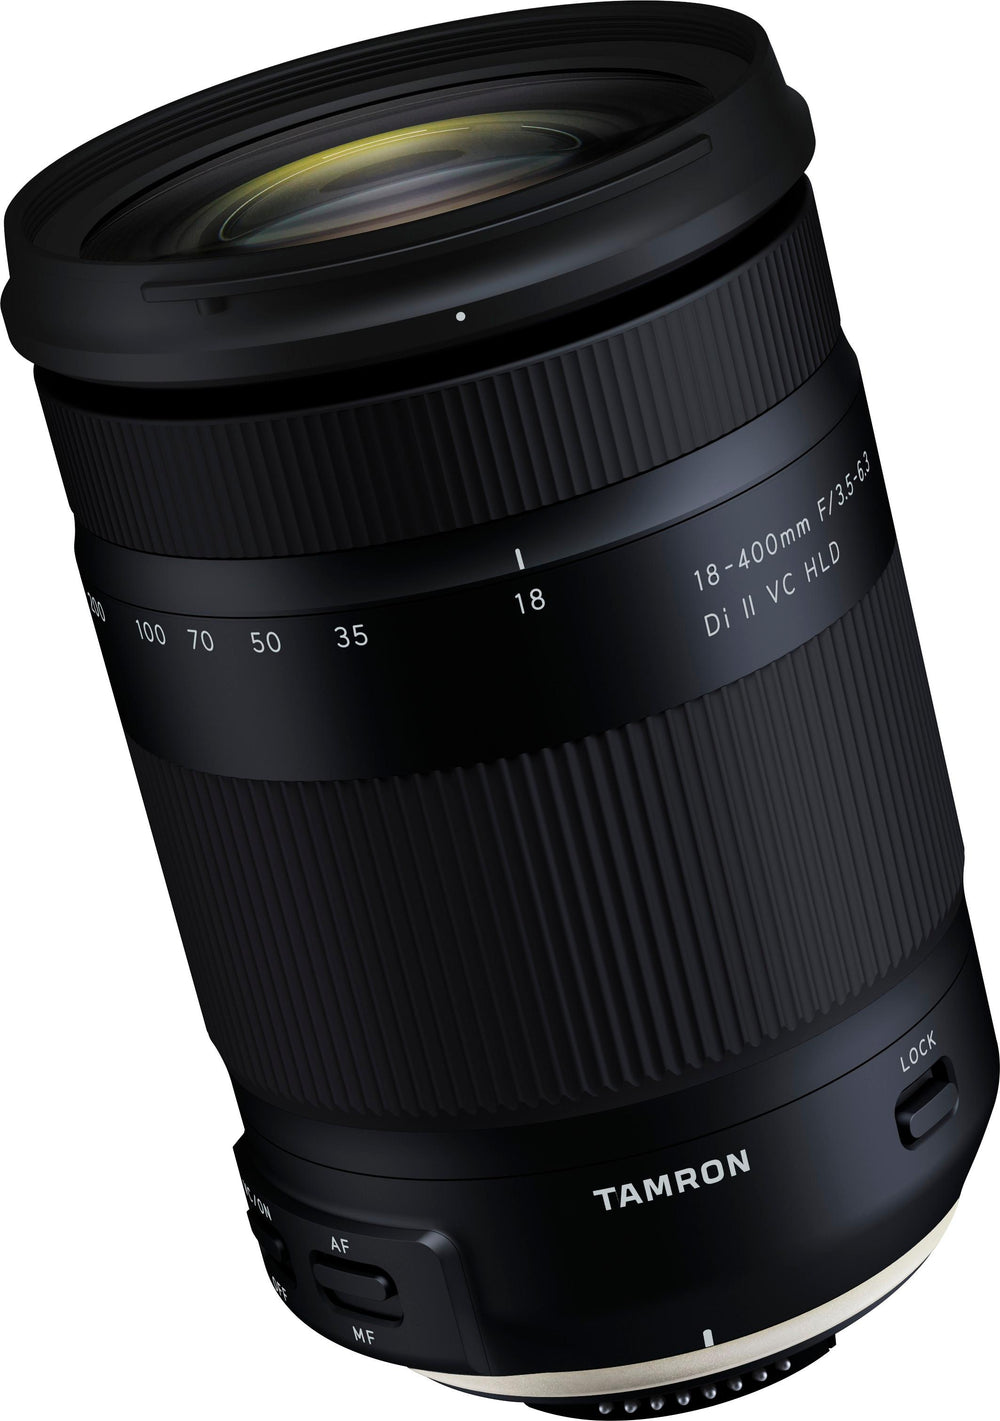 Tamron - 18-400mm F/3.5-6.3 Di II VC HLD All-In-One Telephoto Lens for Nikon APS-C DSLR Cameras - black_1